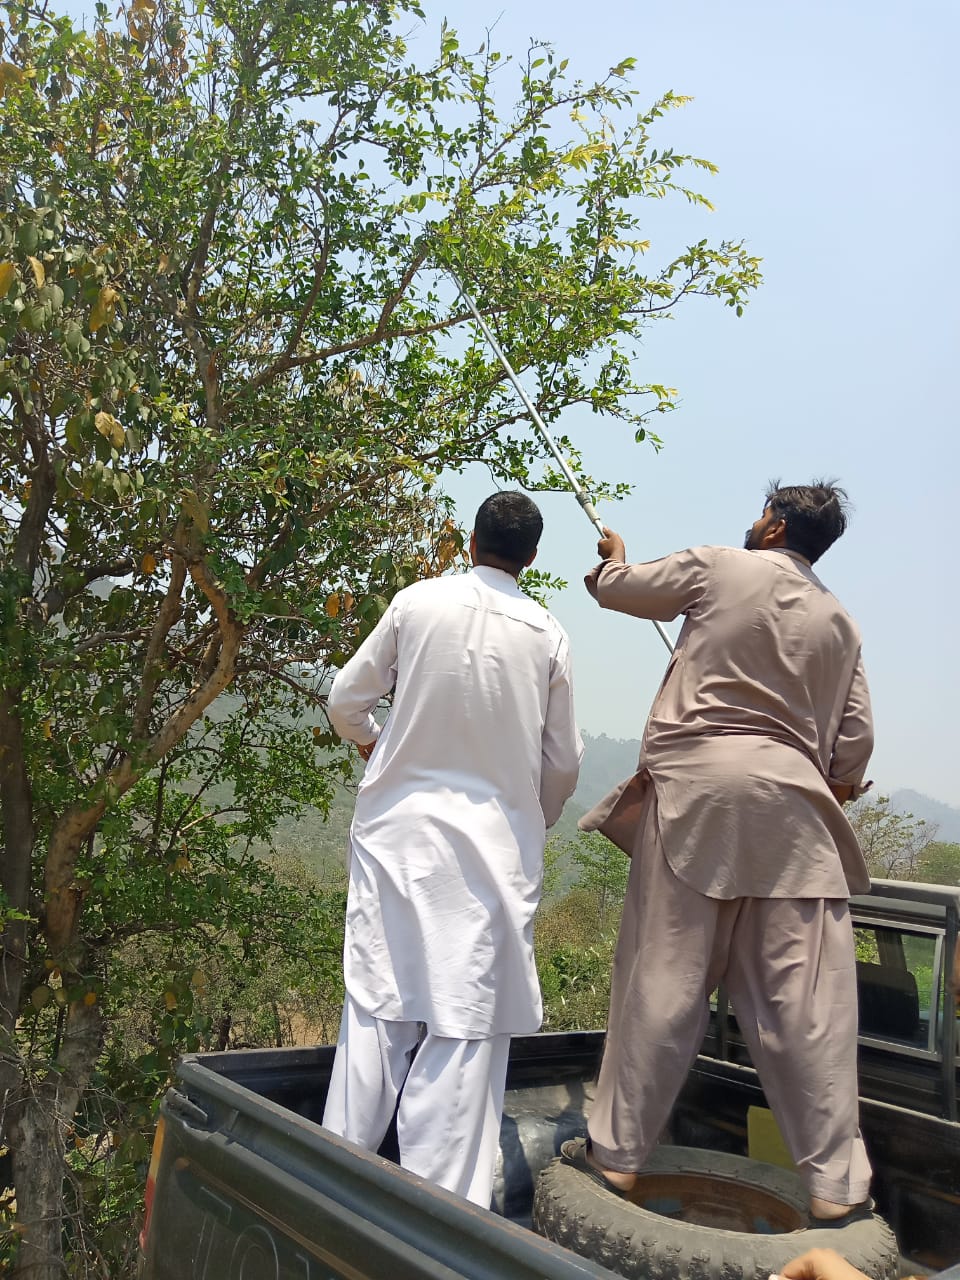 Hannan Majeed and Syed Bilal Hussain Shah using a pole pruner to collect seeds from the top of a tree